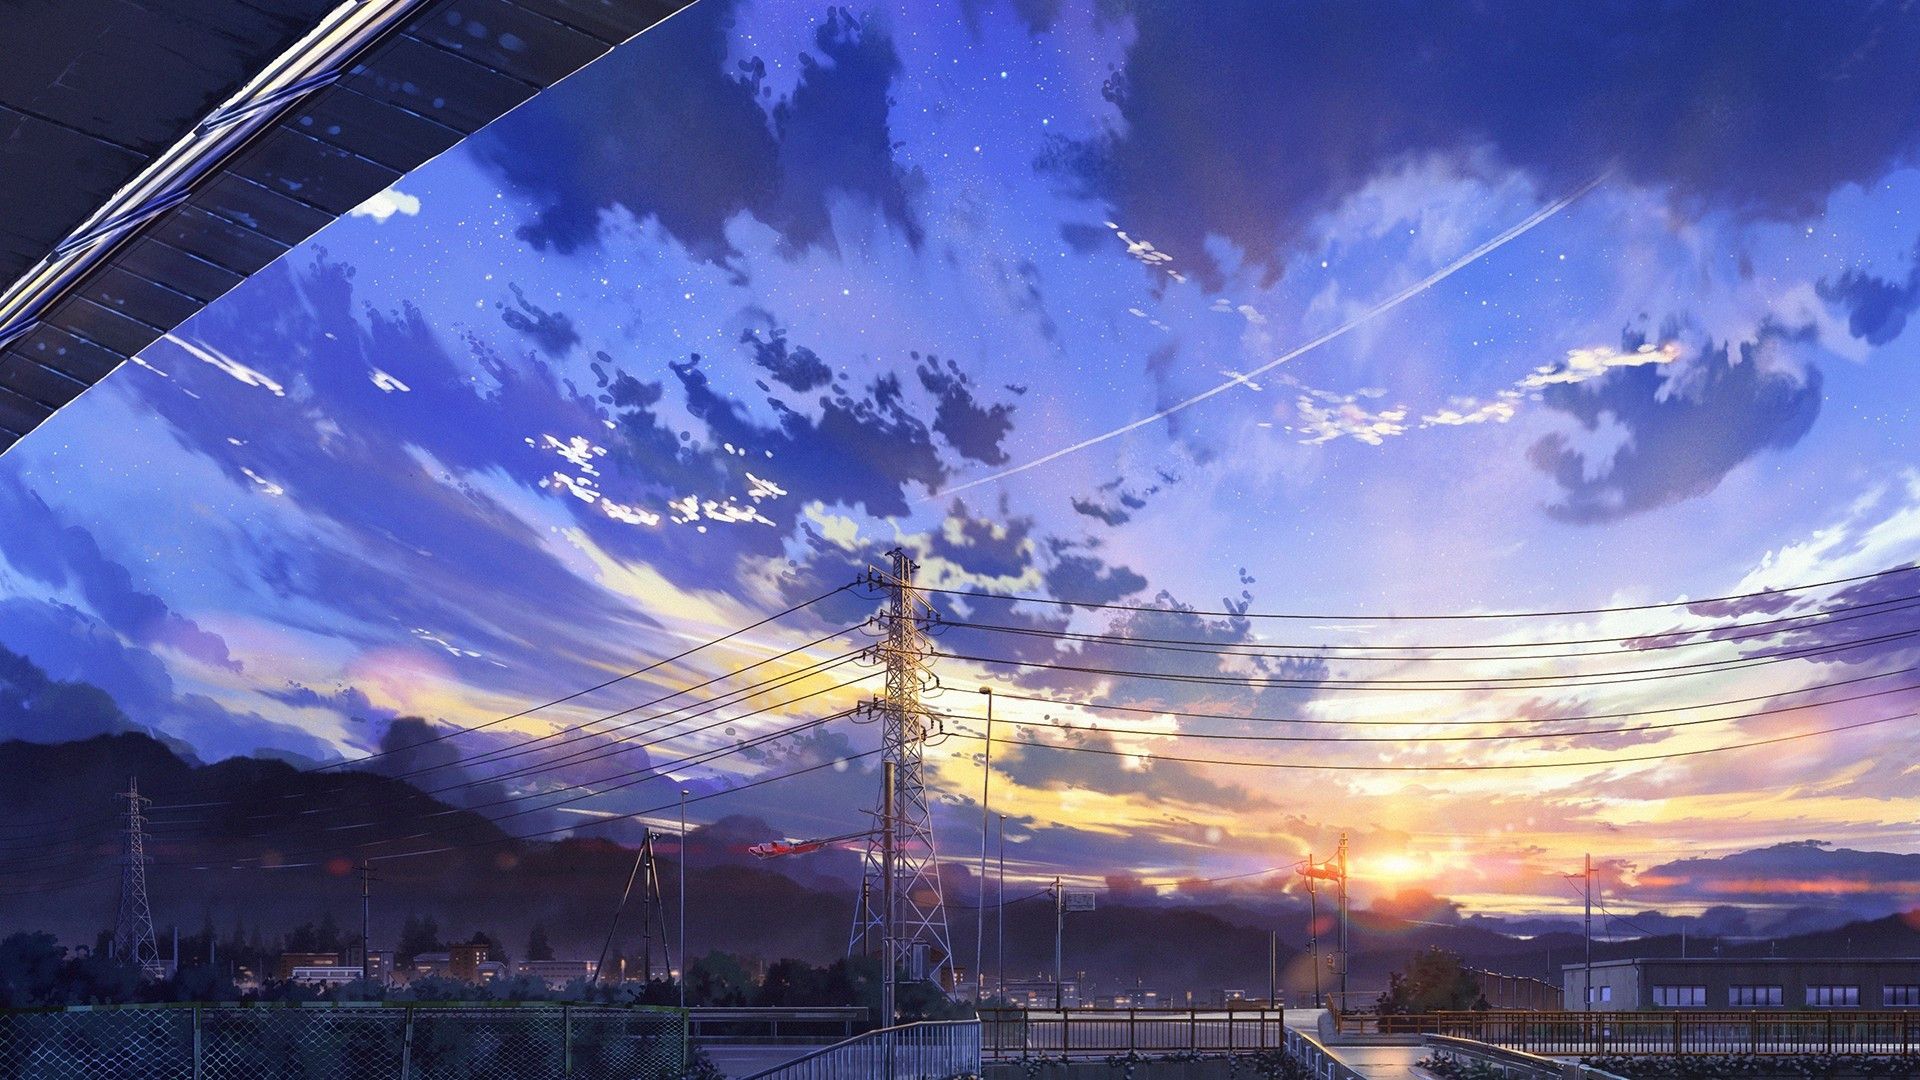 Anime wallpaper with a train station and clouds - Anime landscape, Japan